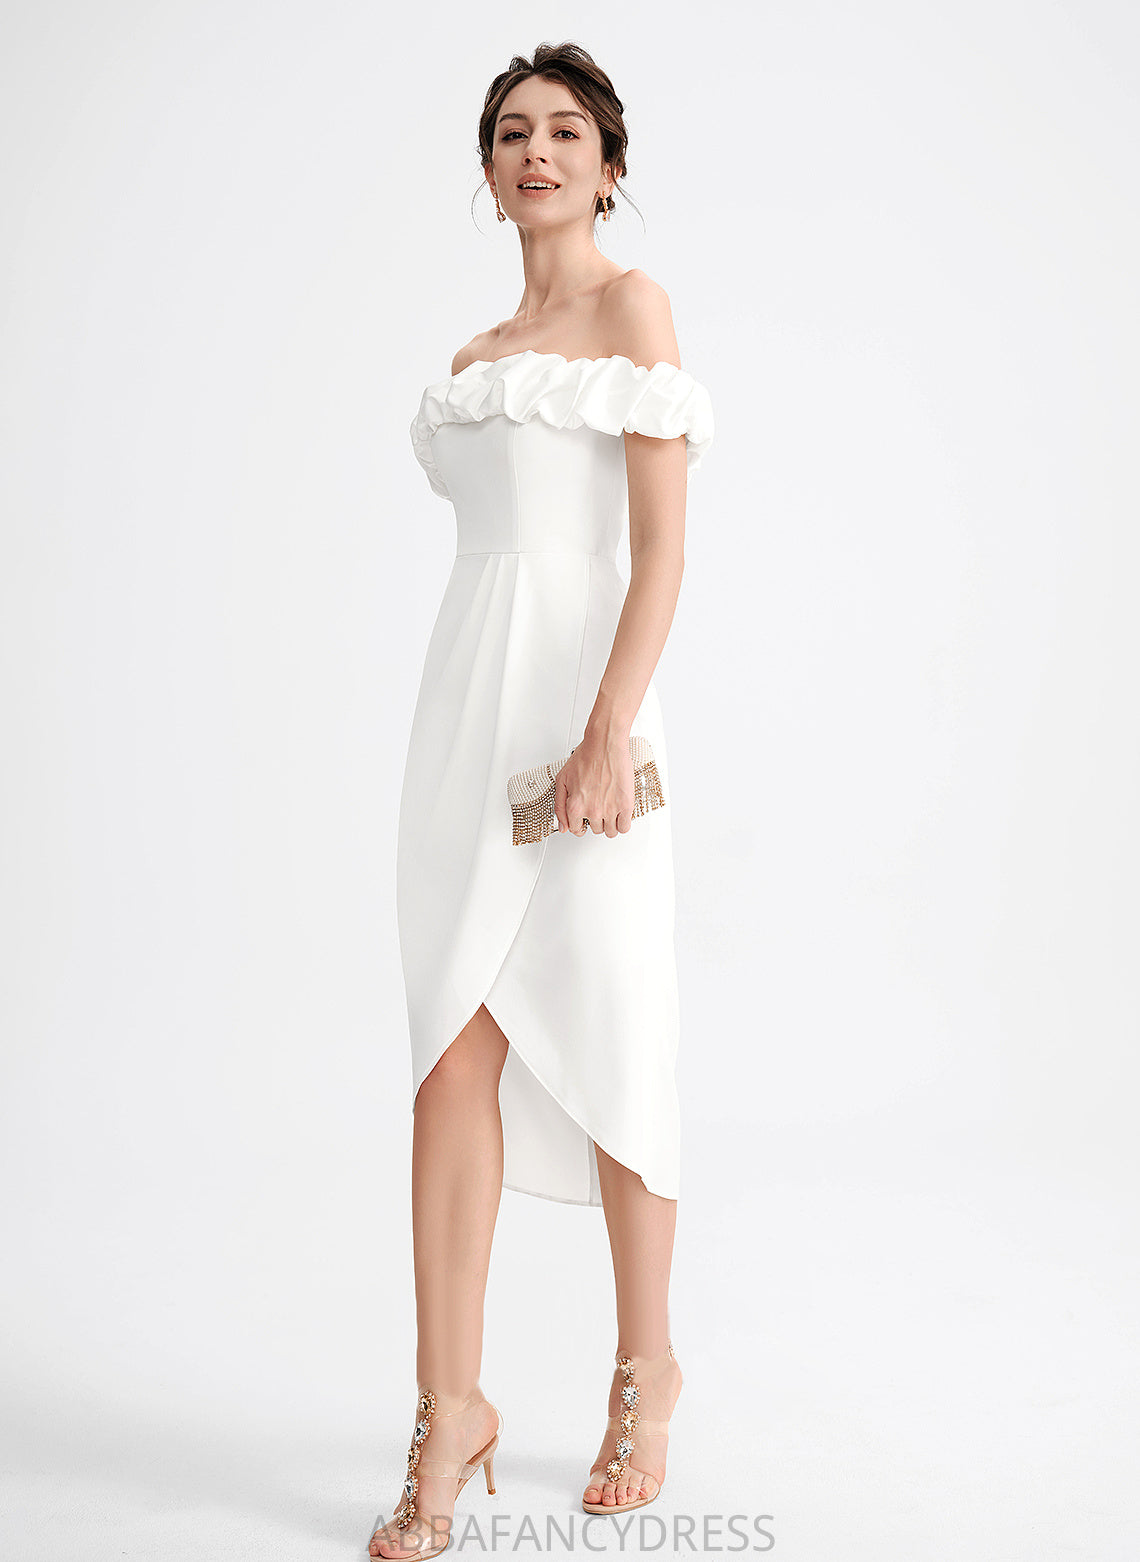 Ruffle Stretch Asymmetrical With Cocktail Dresses Ayana Off-the-Shoulder Dress Crepe Cocktail